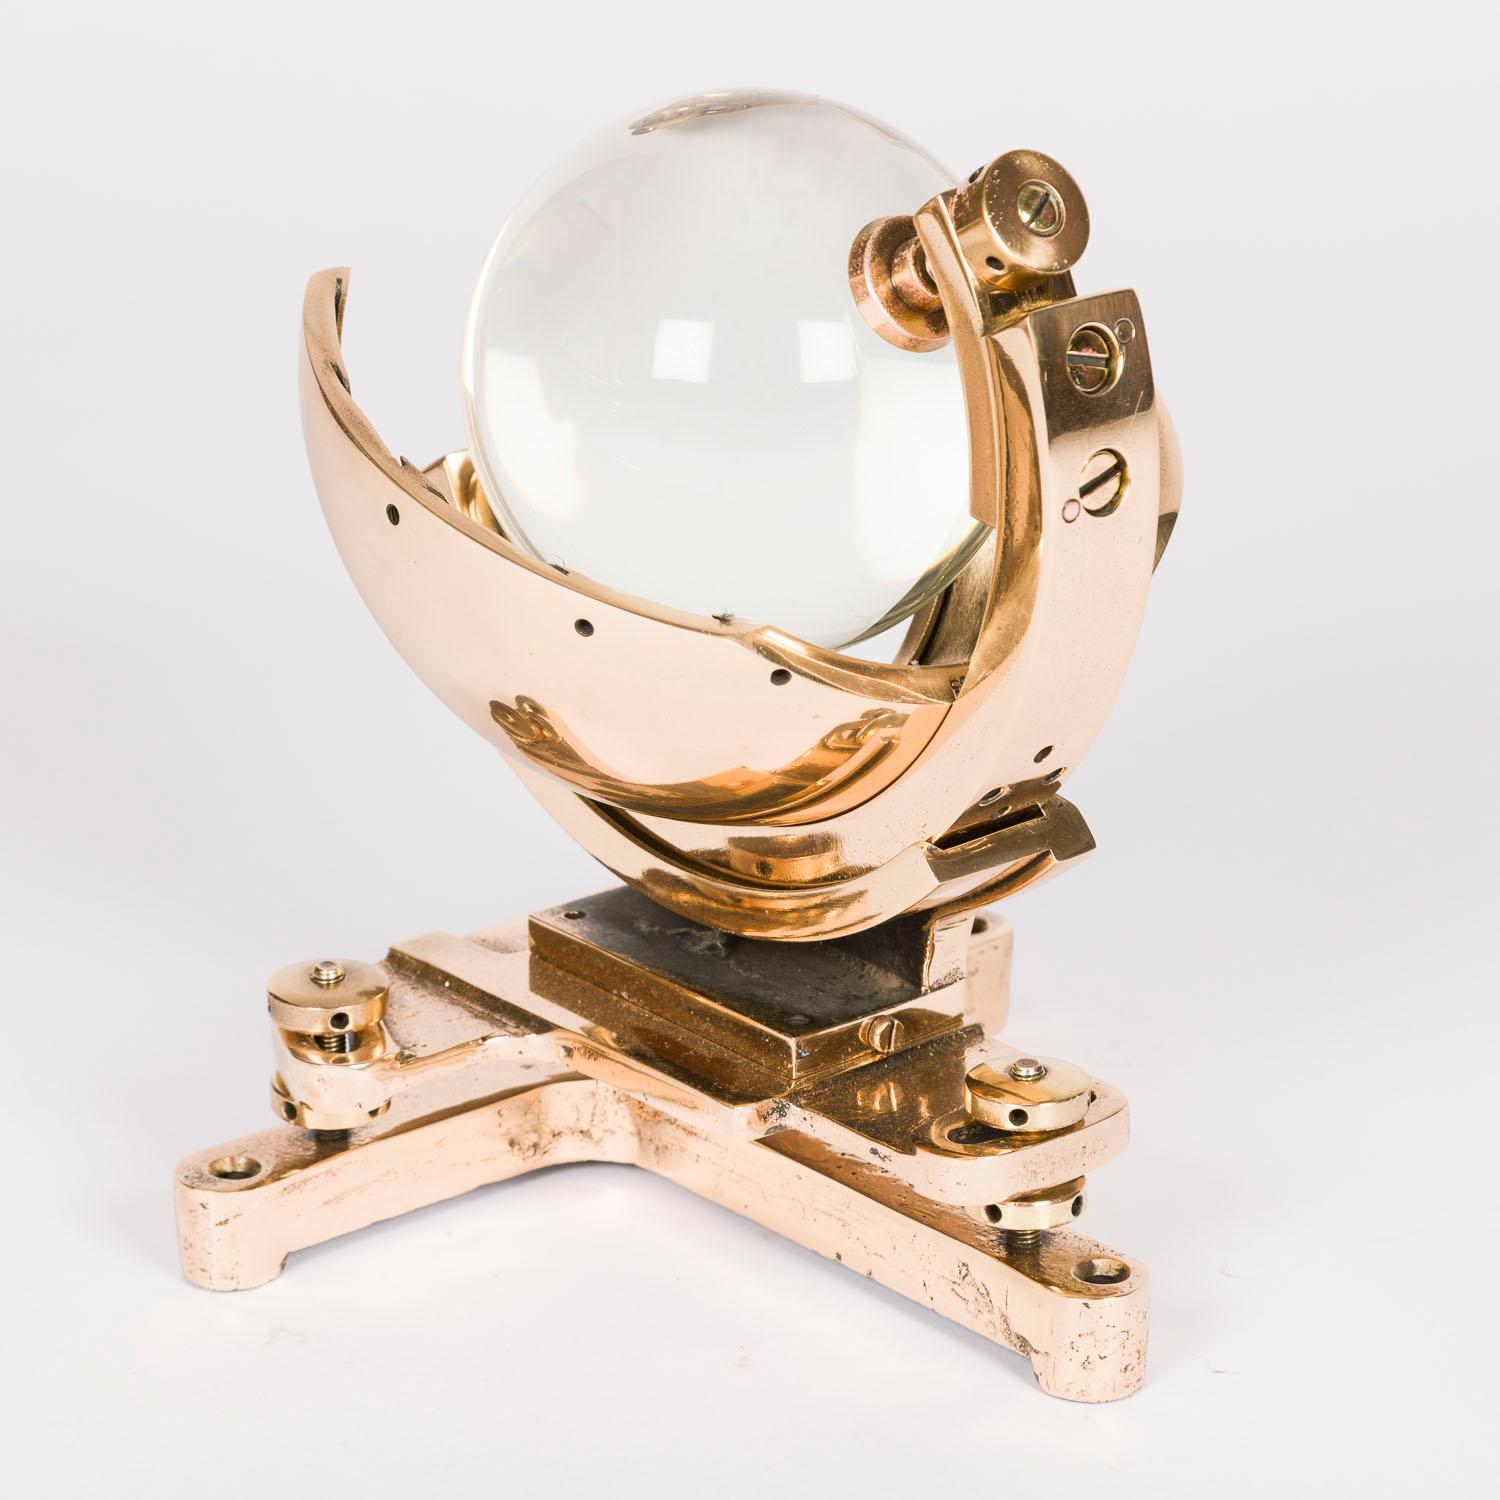 Campbell–Stokes sunshine recorder by Casella & Co of London For Sale 2